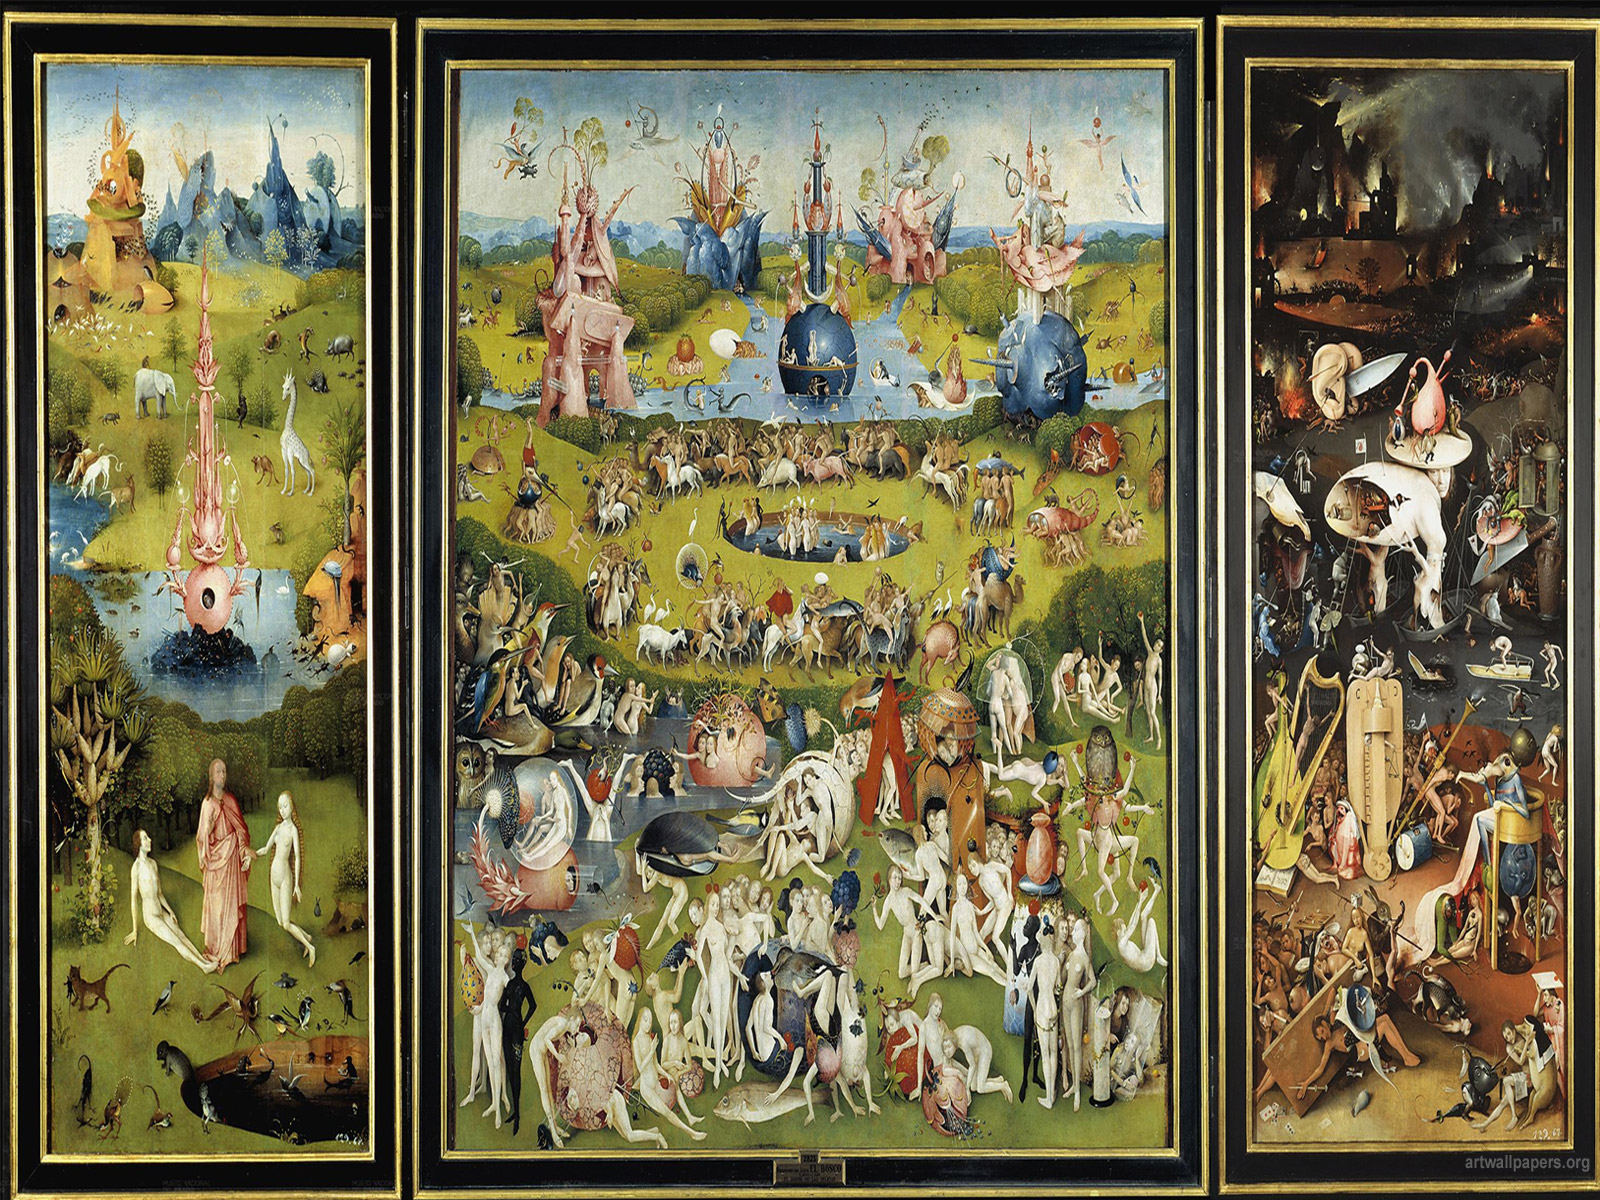 Full Hd Wallpapers 1080p 1920 X 1080 - 1080p Hieronymus Bosch Garden Of Earthly Delights Hd , HD Wallpaper & Backgrounds